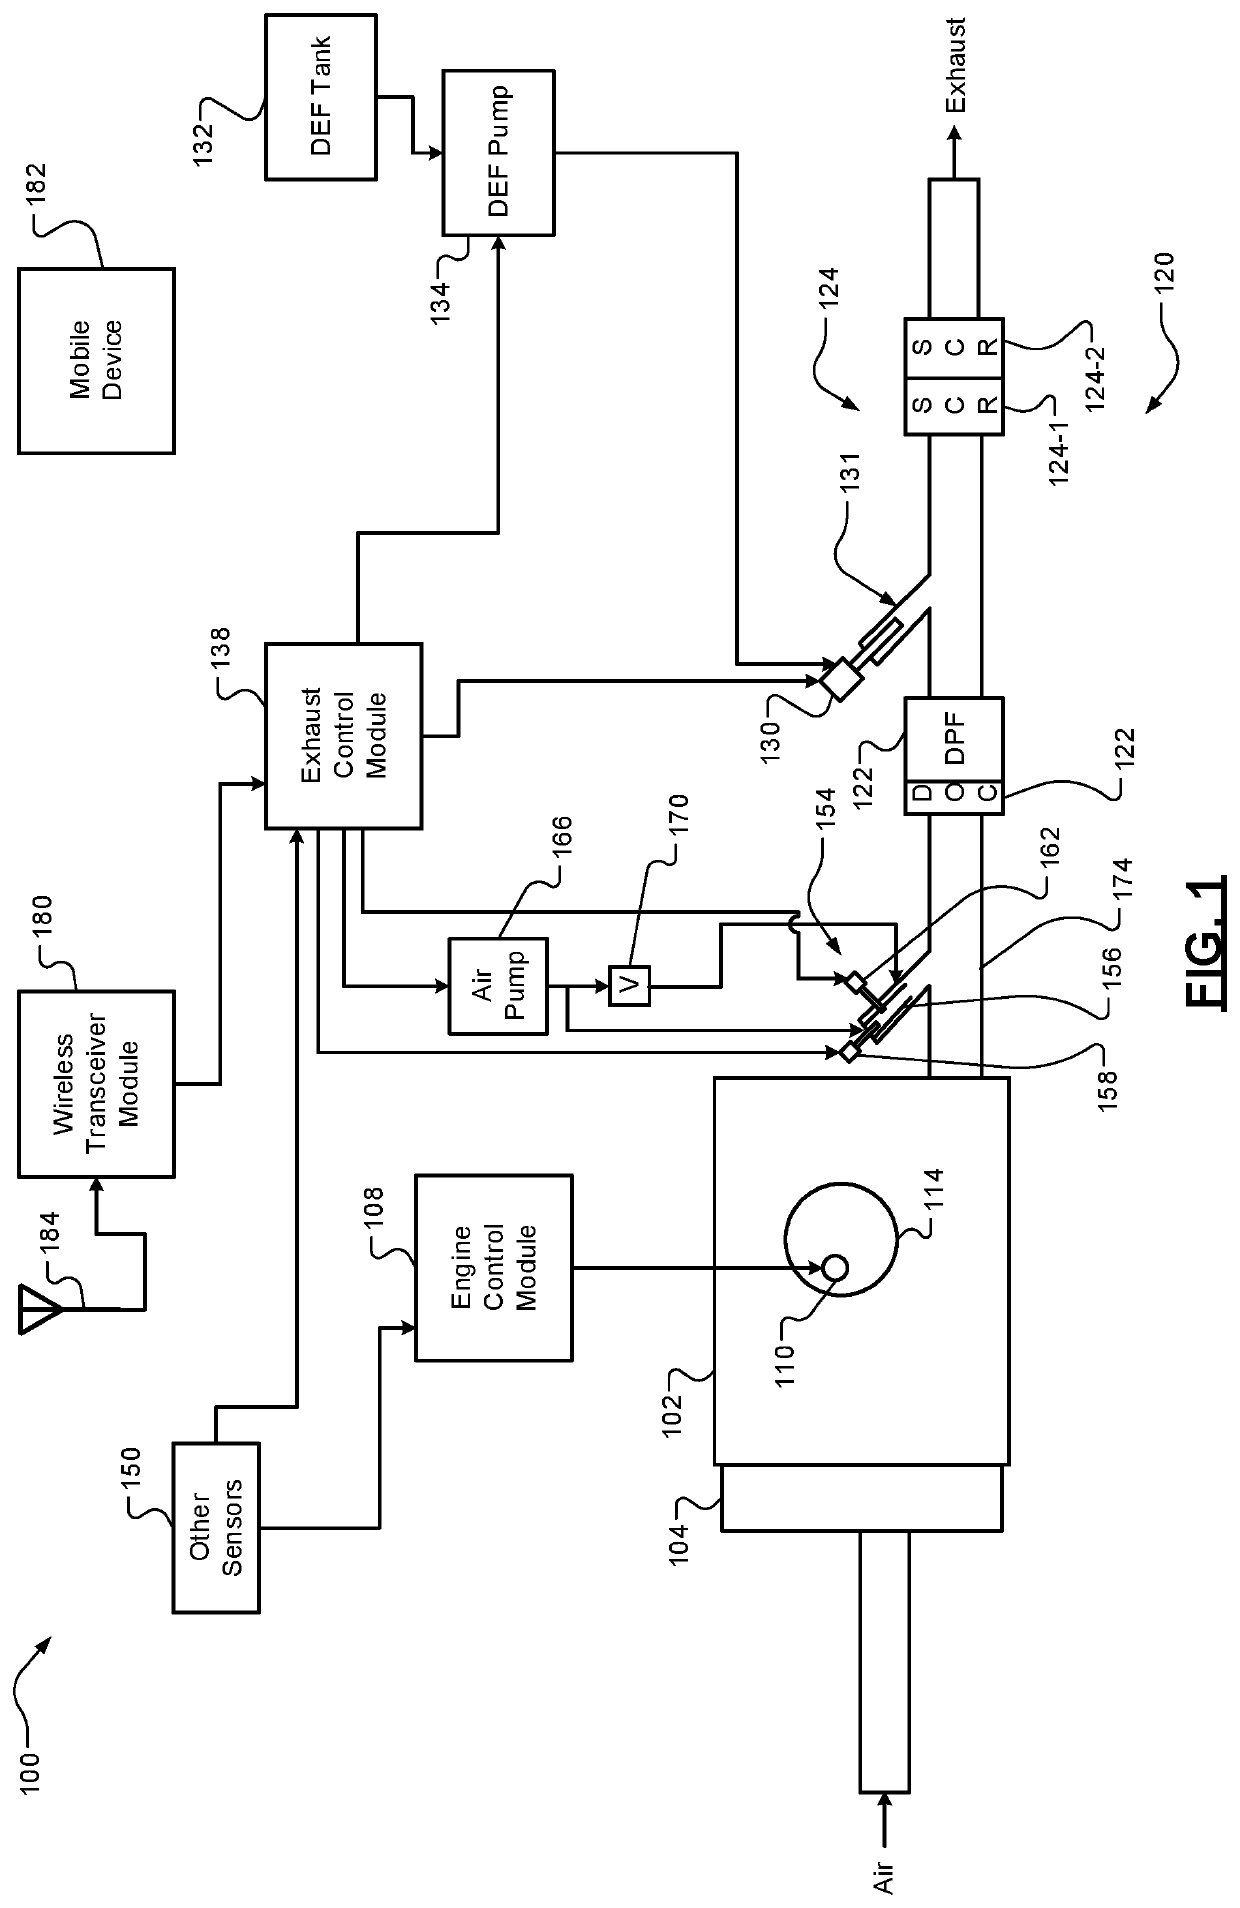 Selective catalytic reduction catalyst pre-heating and exhaust burner air control